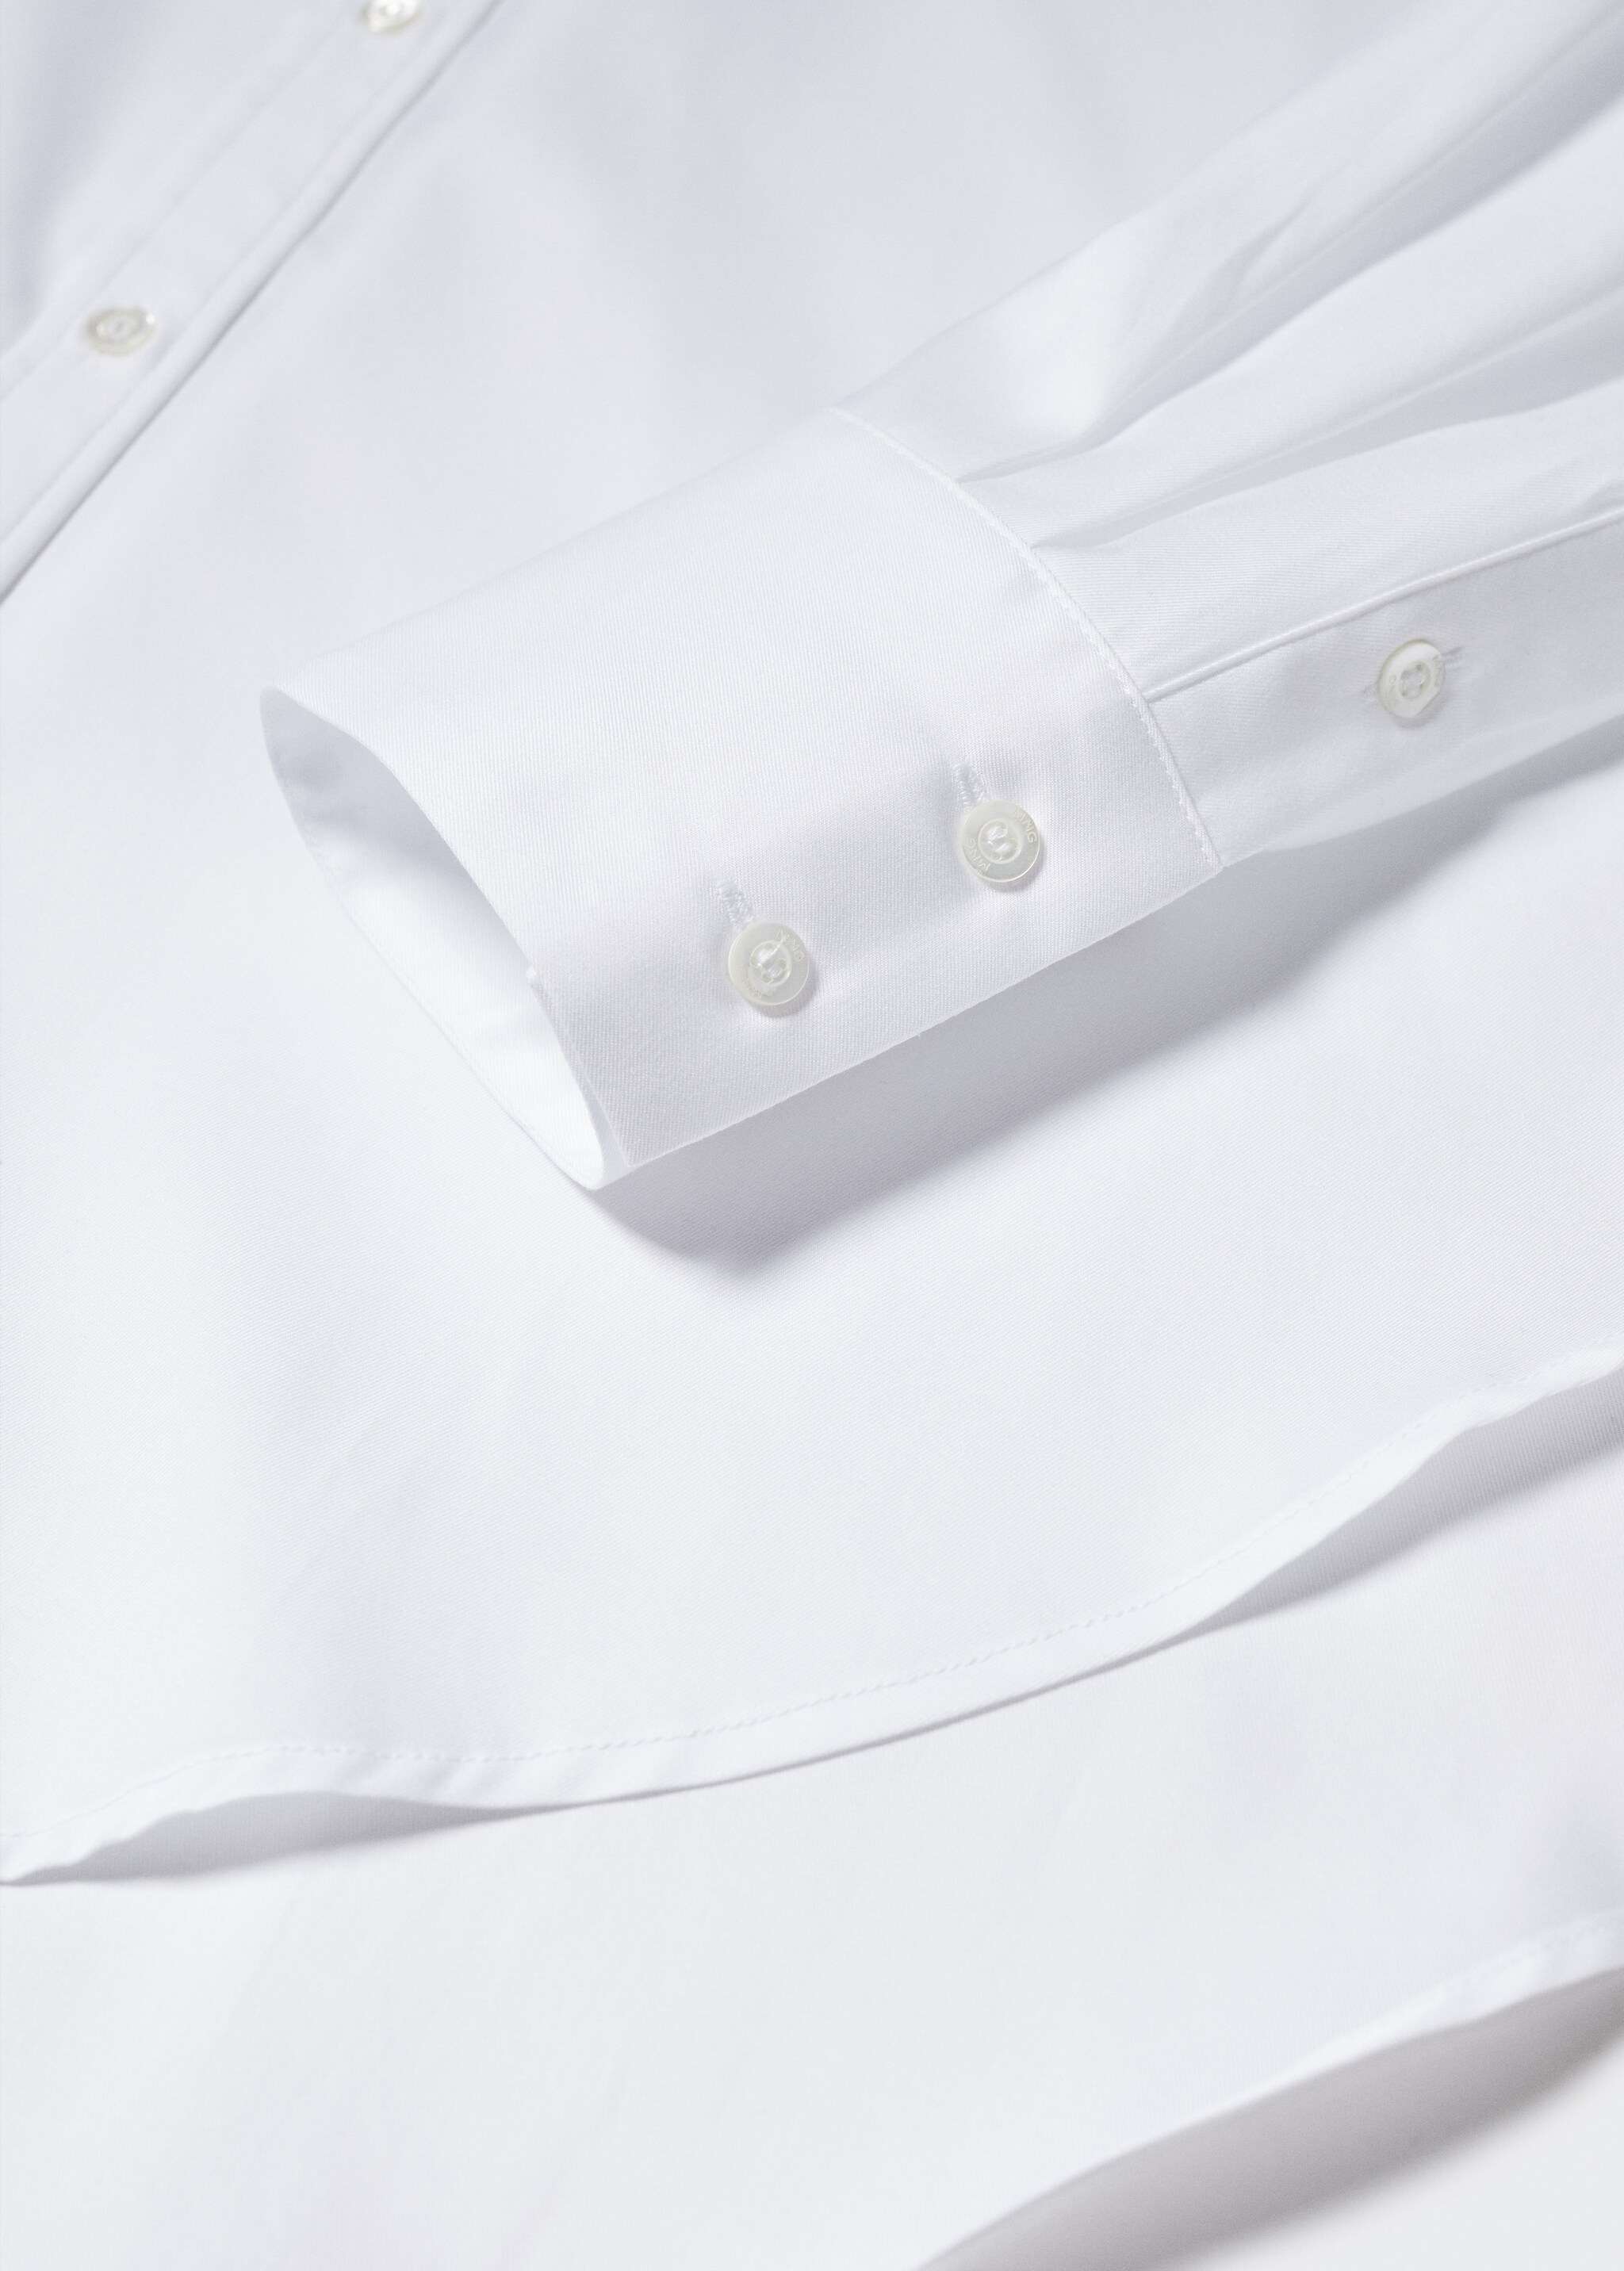 Oversize cotton shirt - Details of the article 8